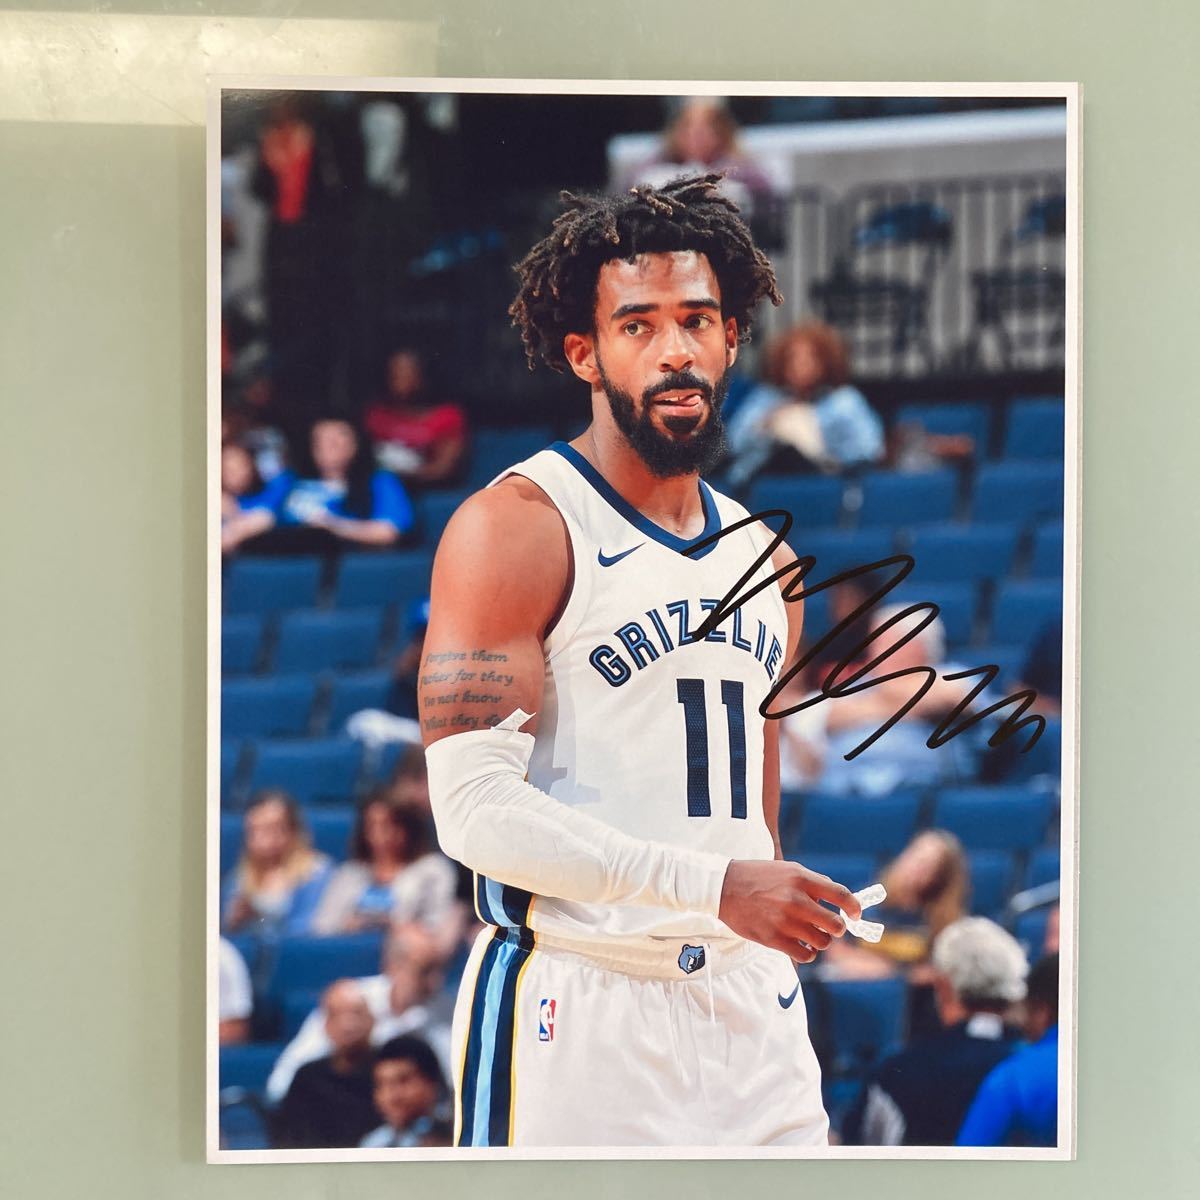  Mike * Conley with autograph super large photograph...Mike Conley...